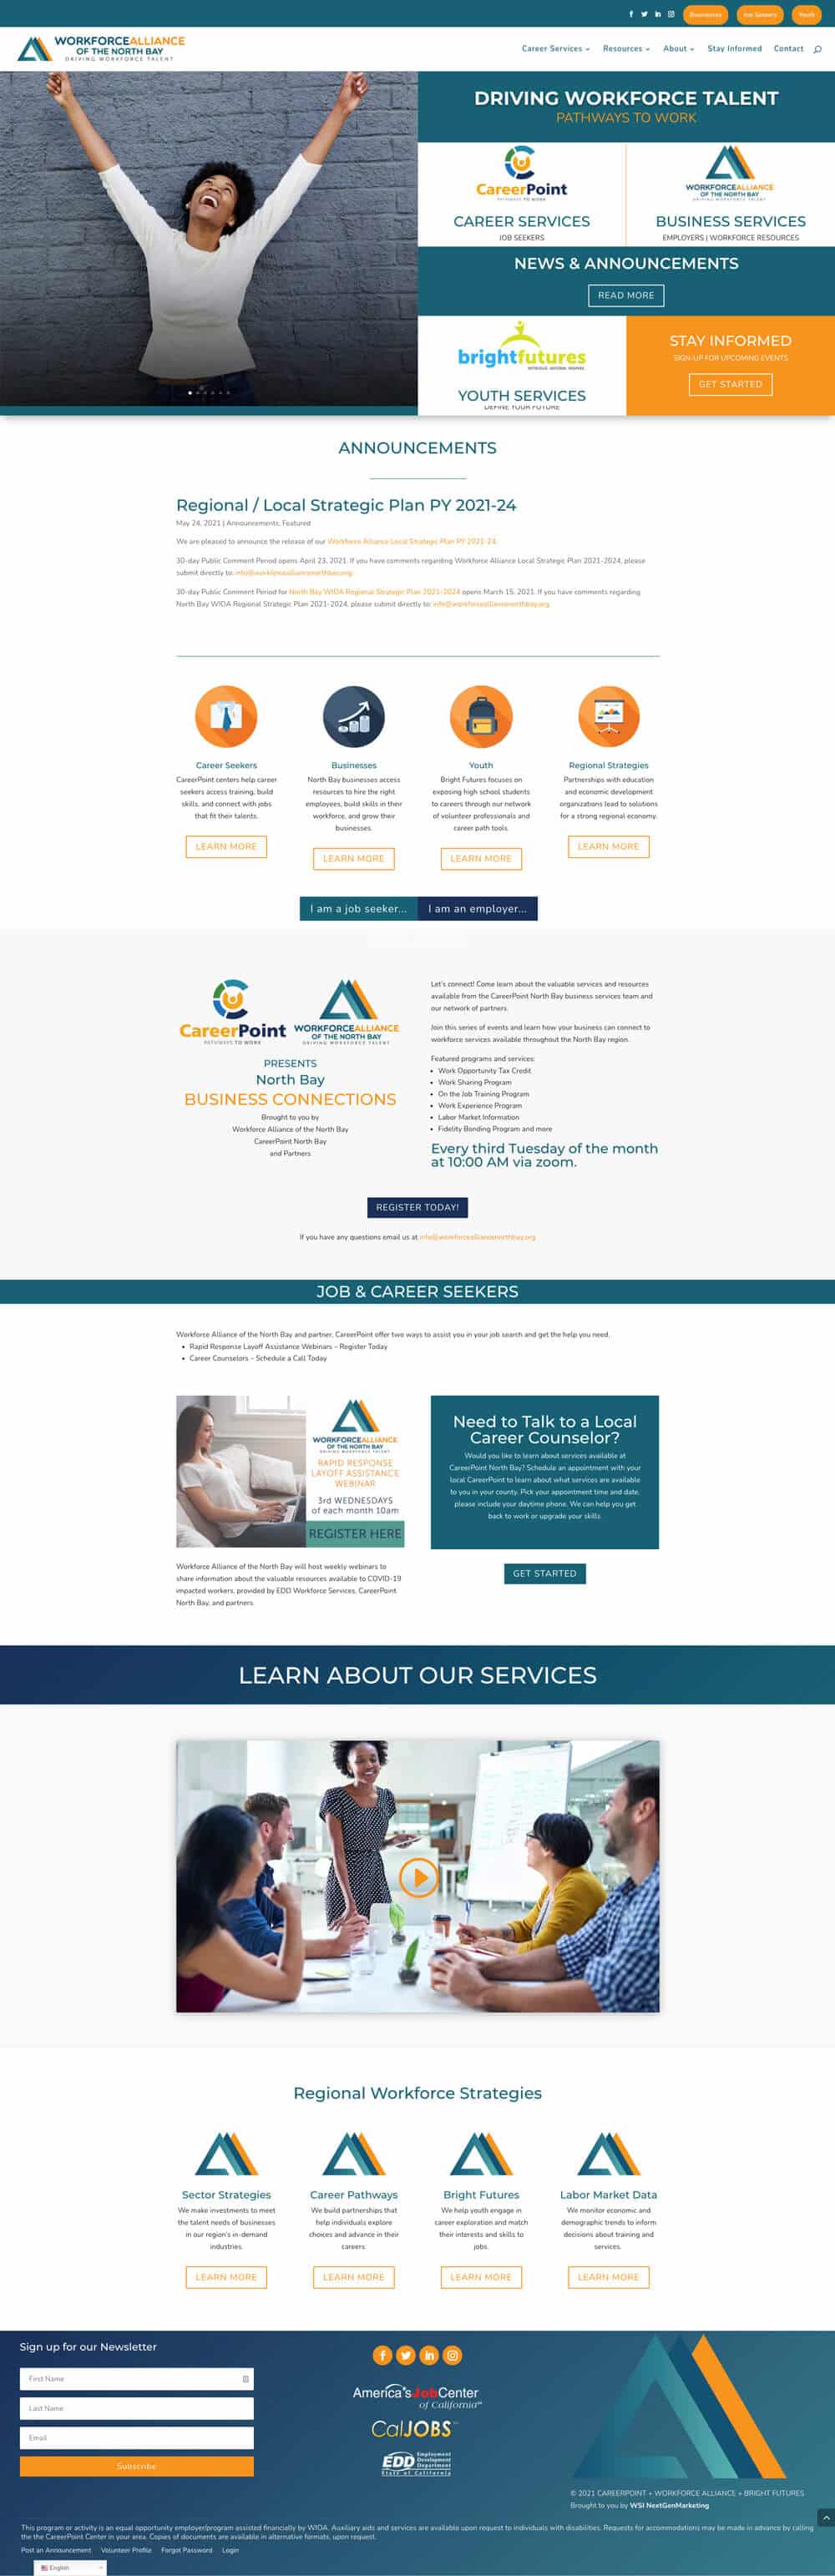 workforce-alliance-home-page